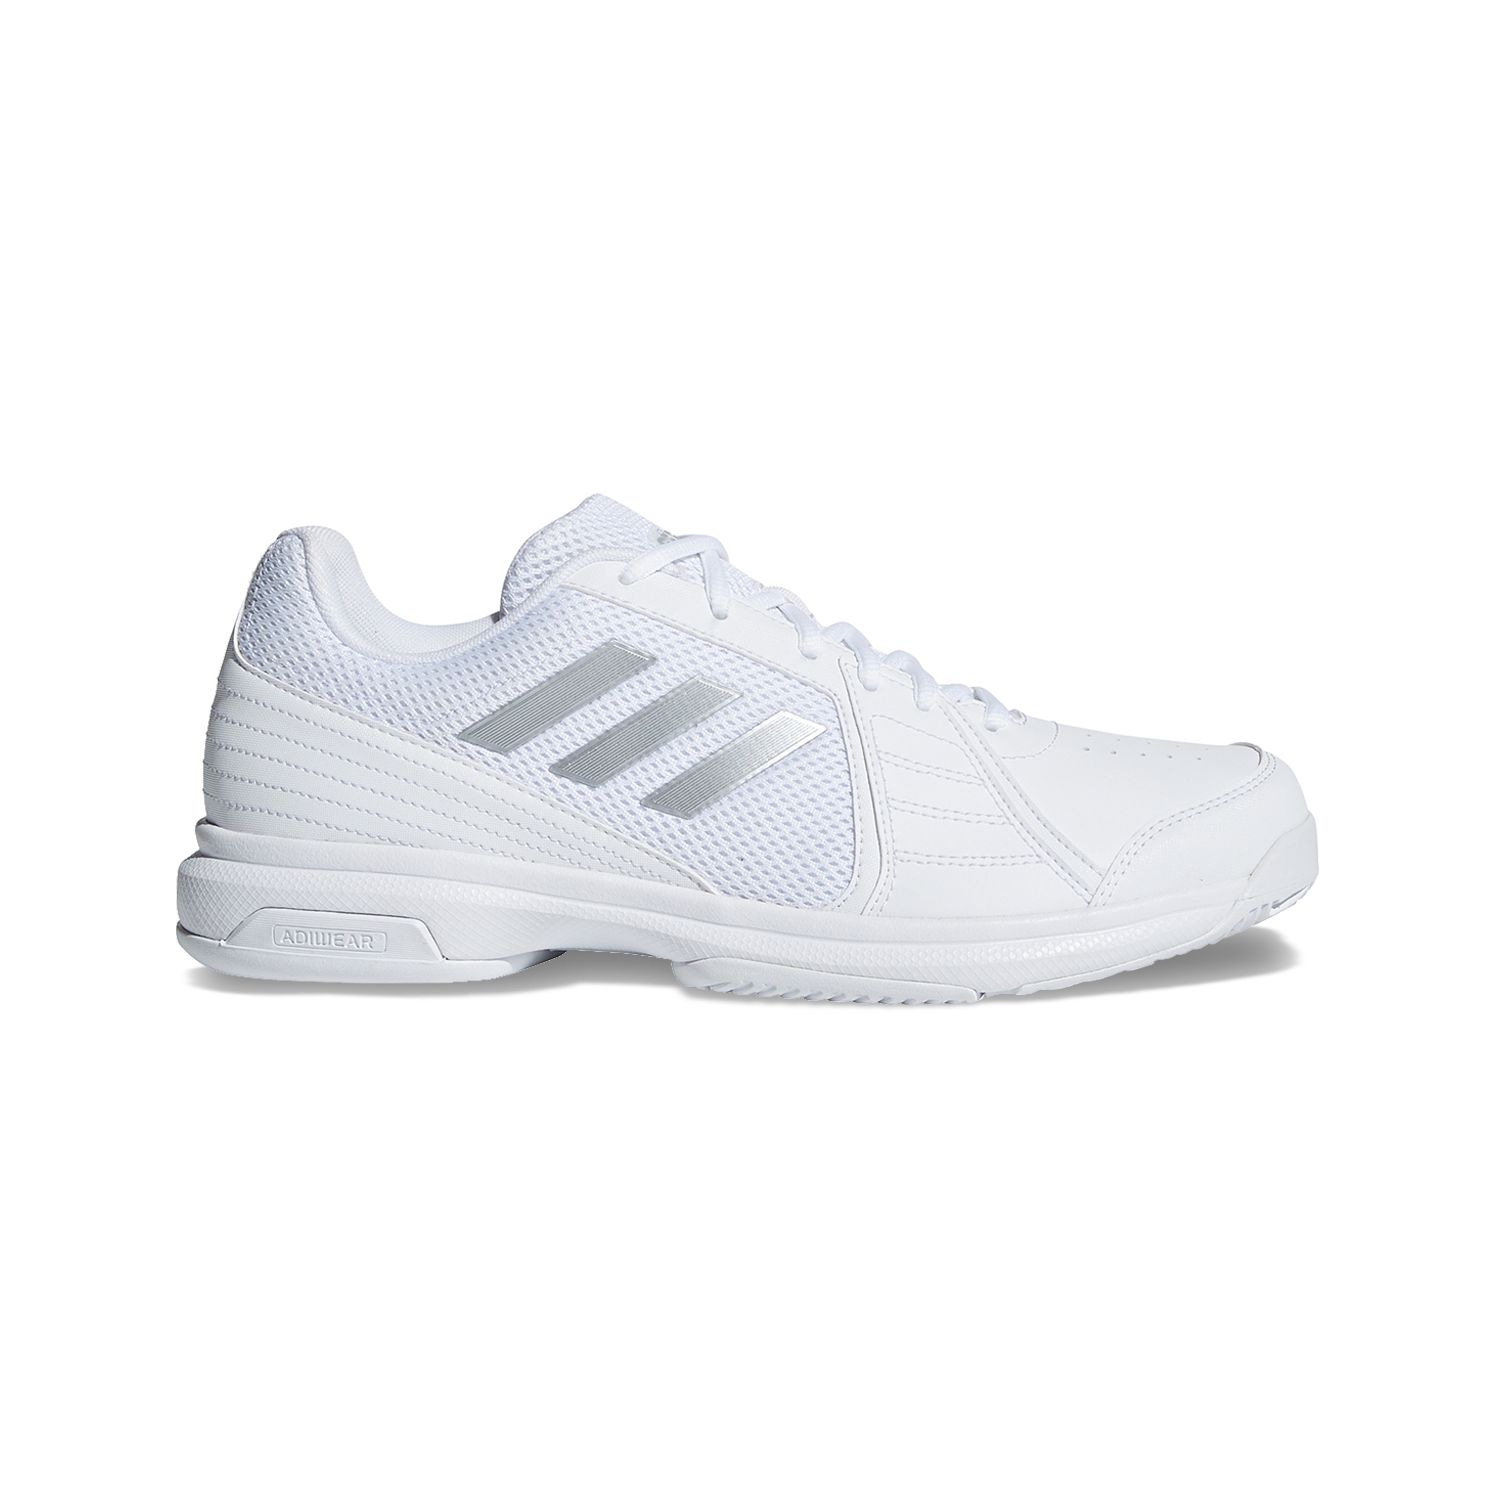 adidas approach tennis shoes review